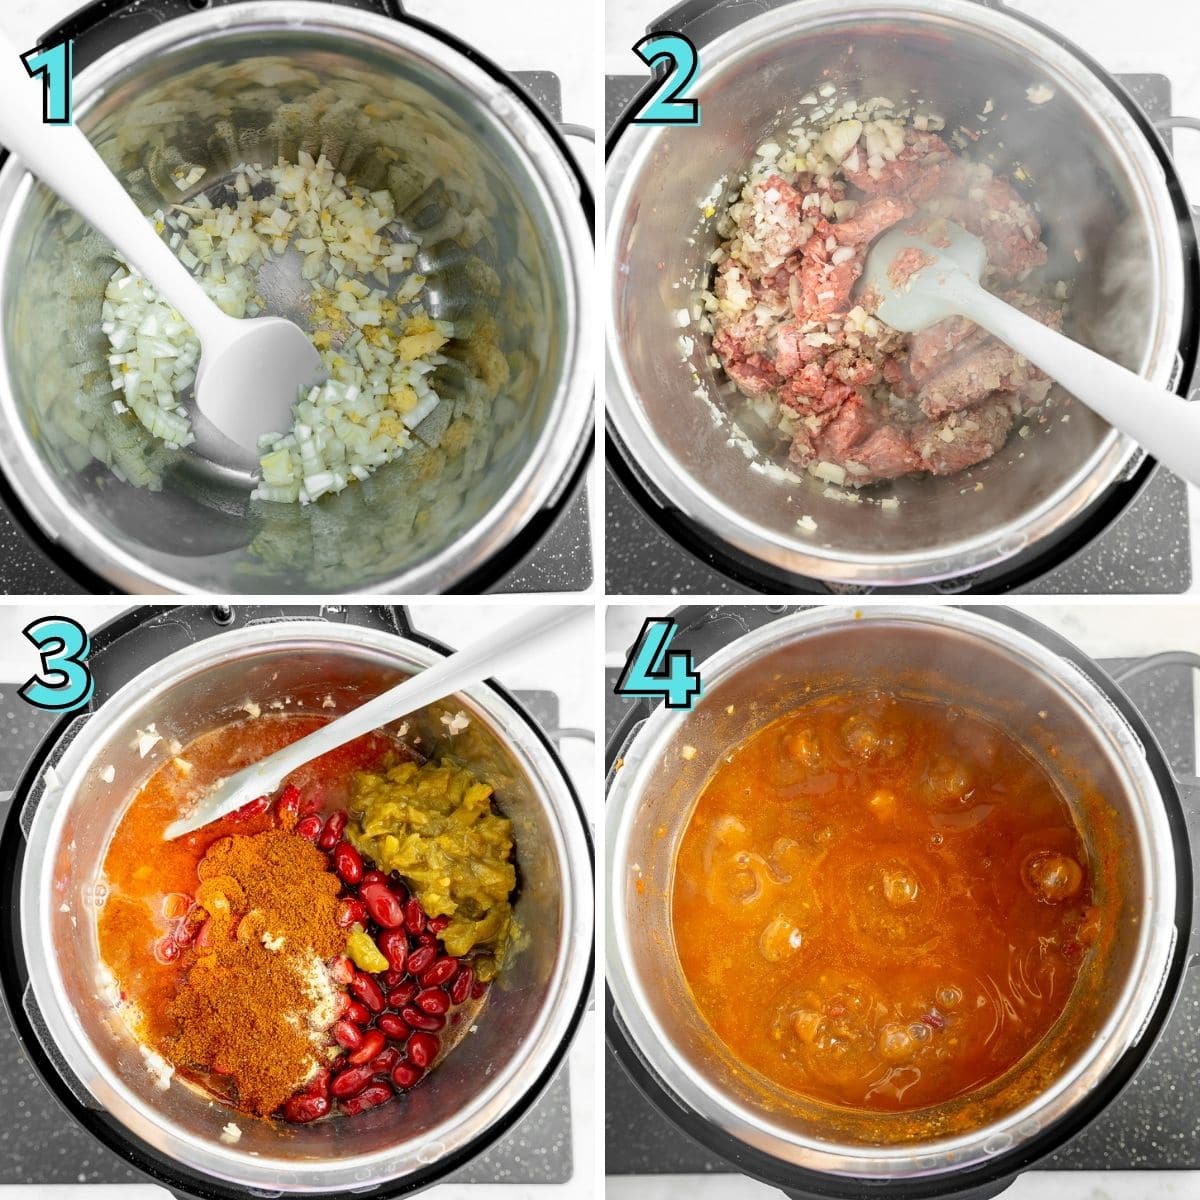 Step by step instructions to prepare instant pot chili. 